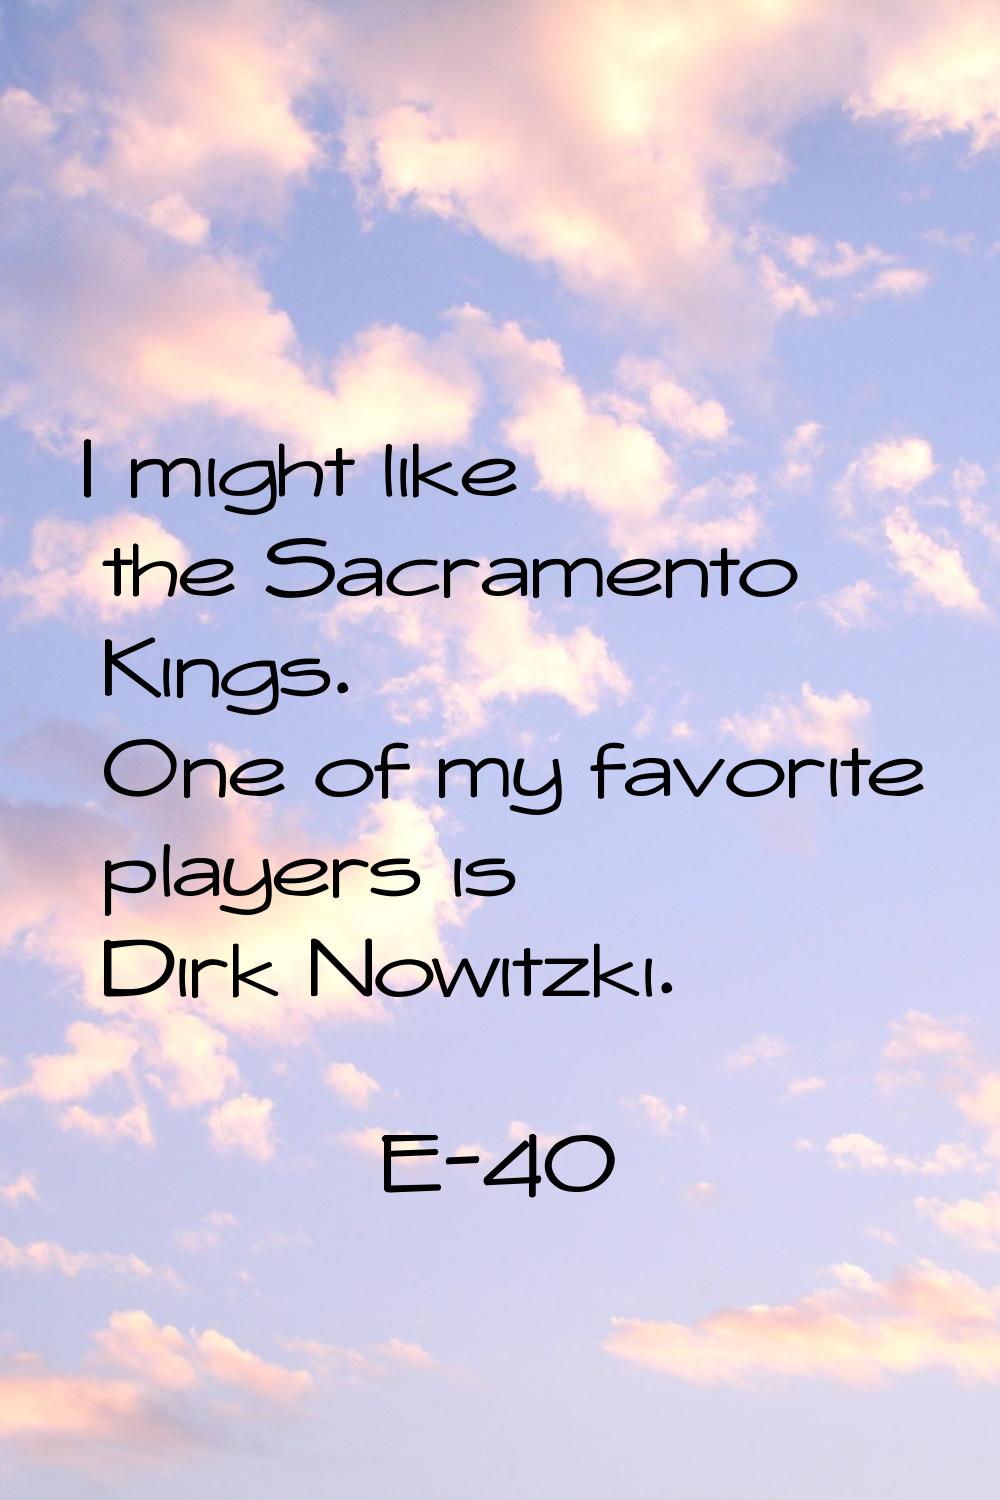 I might like the Sacramento Kings. One of my favorite players is Dirk Nowitzki.